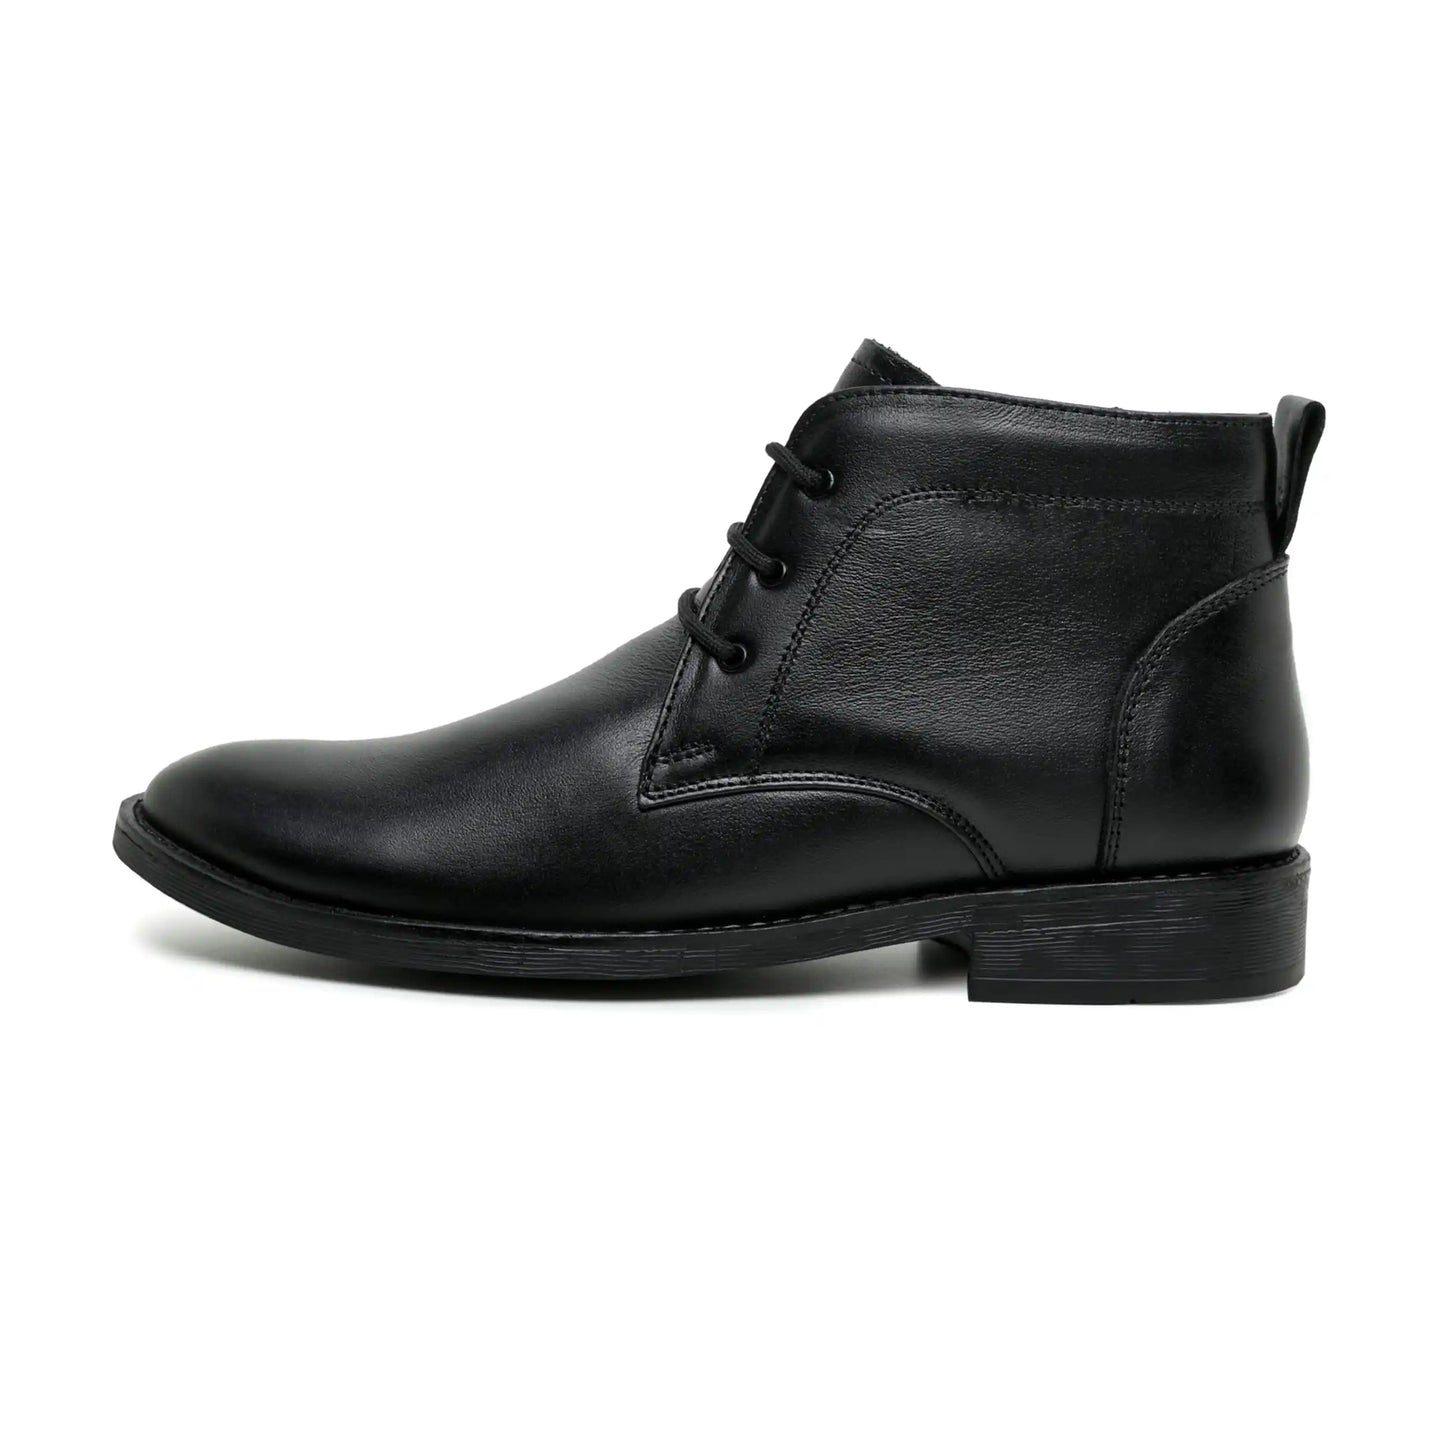 Men Pure Leather Chukka Boots Ankle Shoes